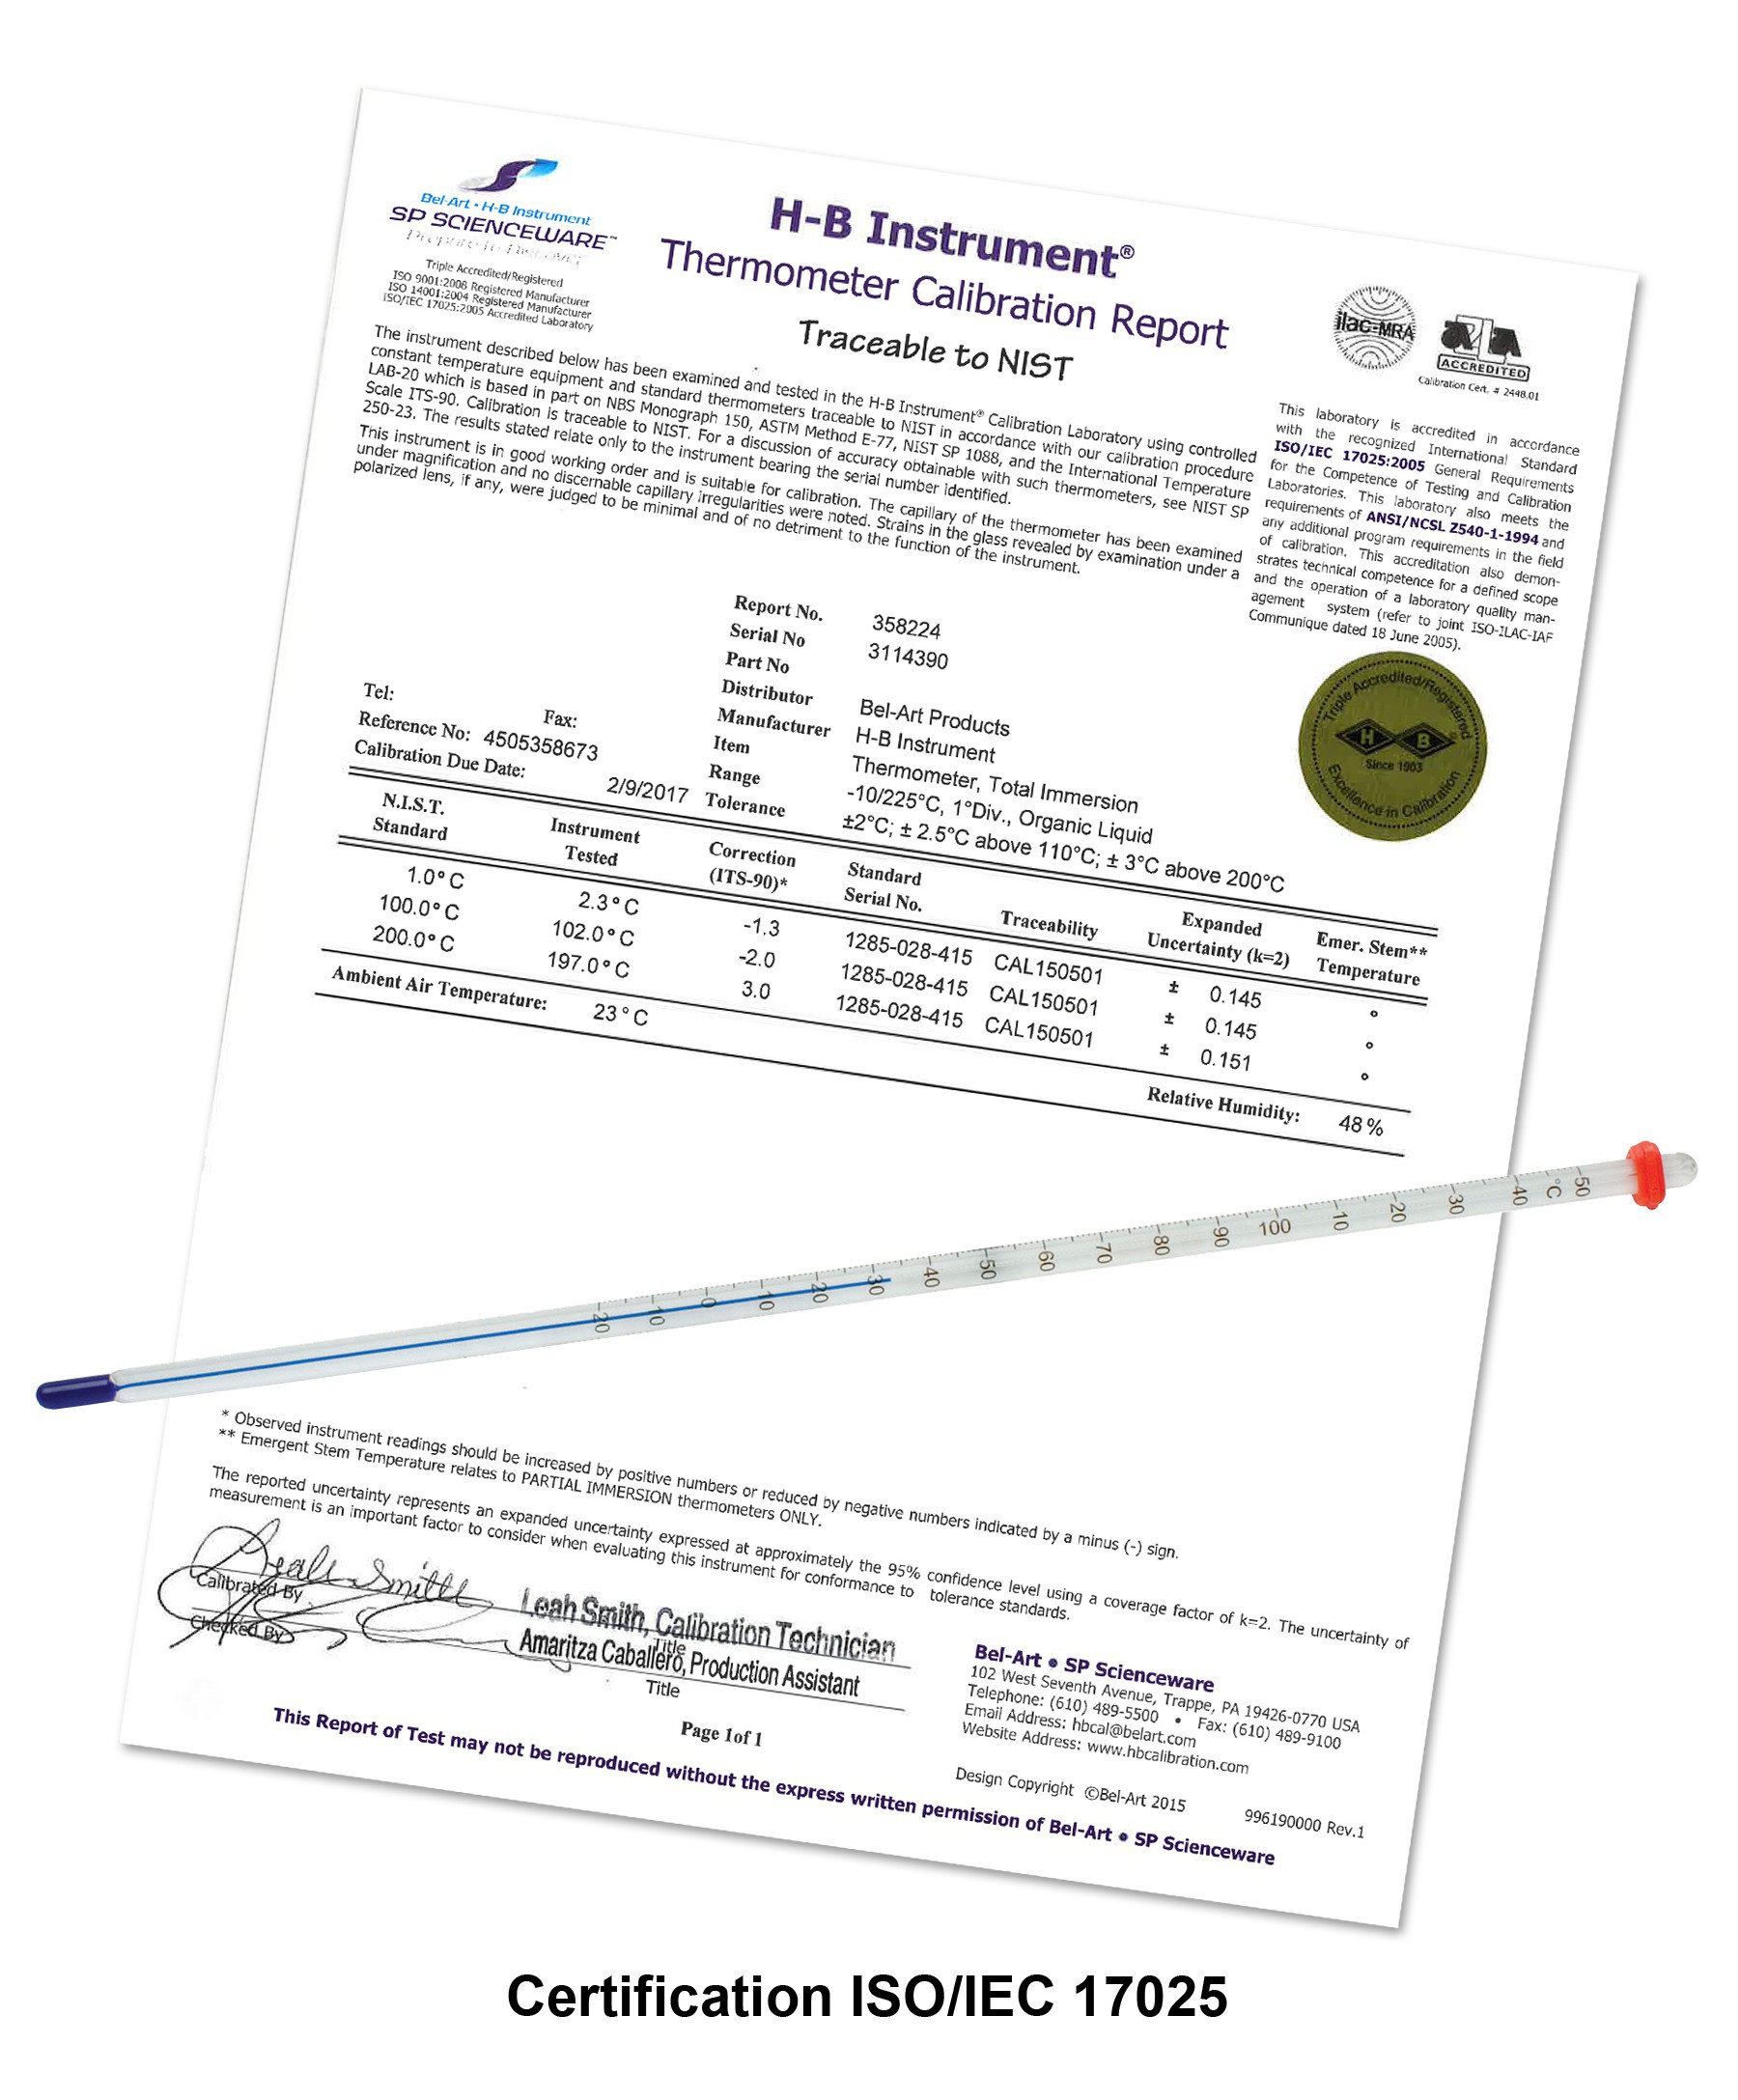 H-B DURAC Plus Calibrated Liquid-In-Glass Thermometer; -1 to 201C, Total Immersion, Organic Liquid Fill